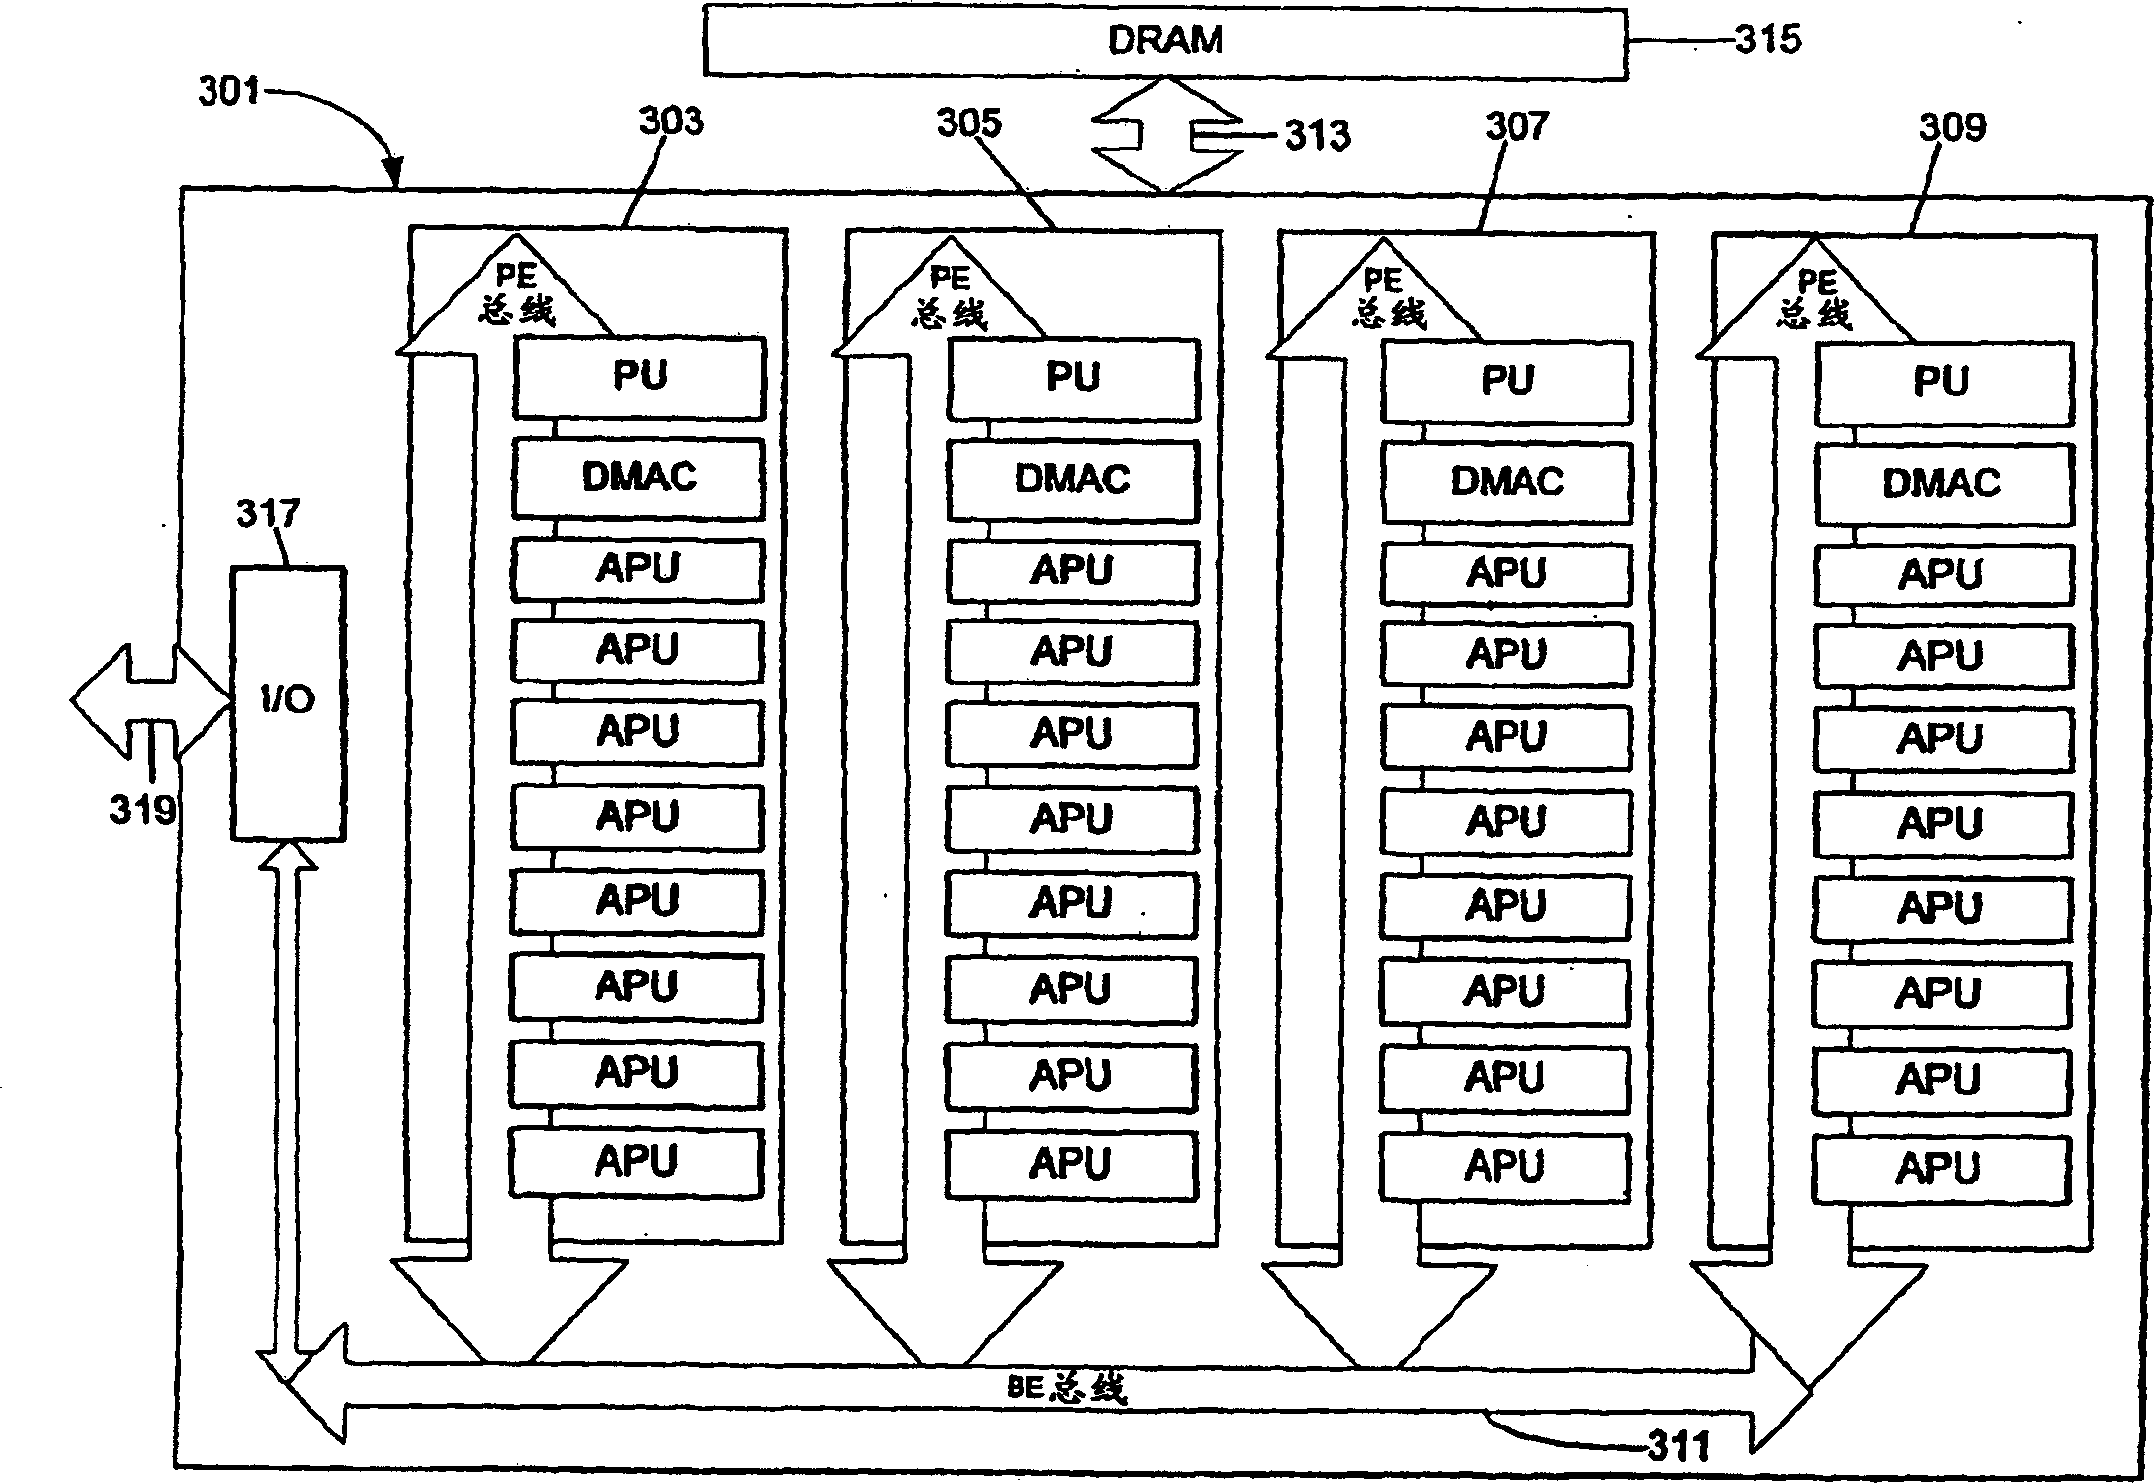 Processing modules for computer architecture for broadband networks